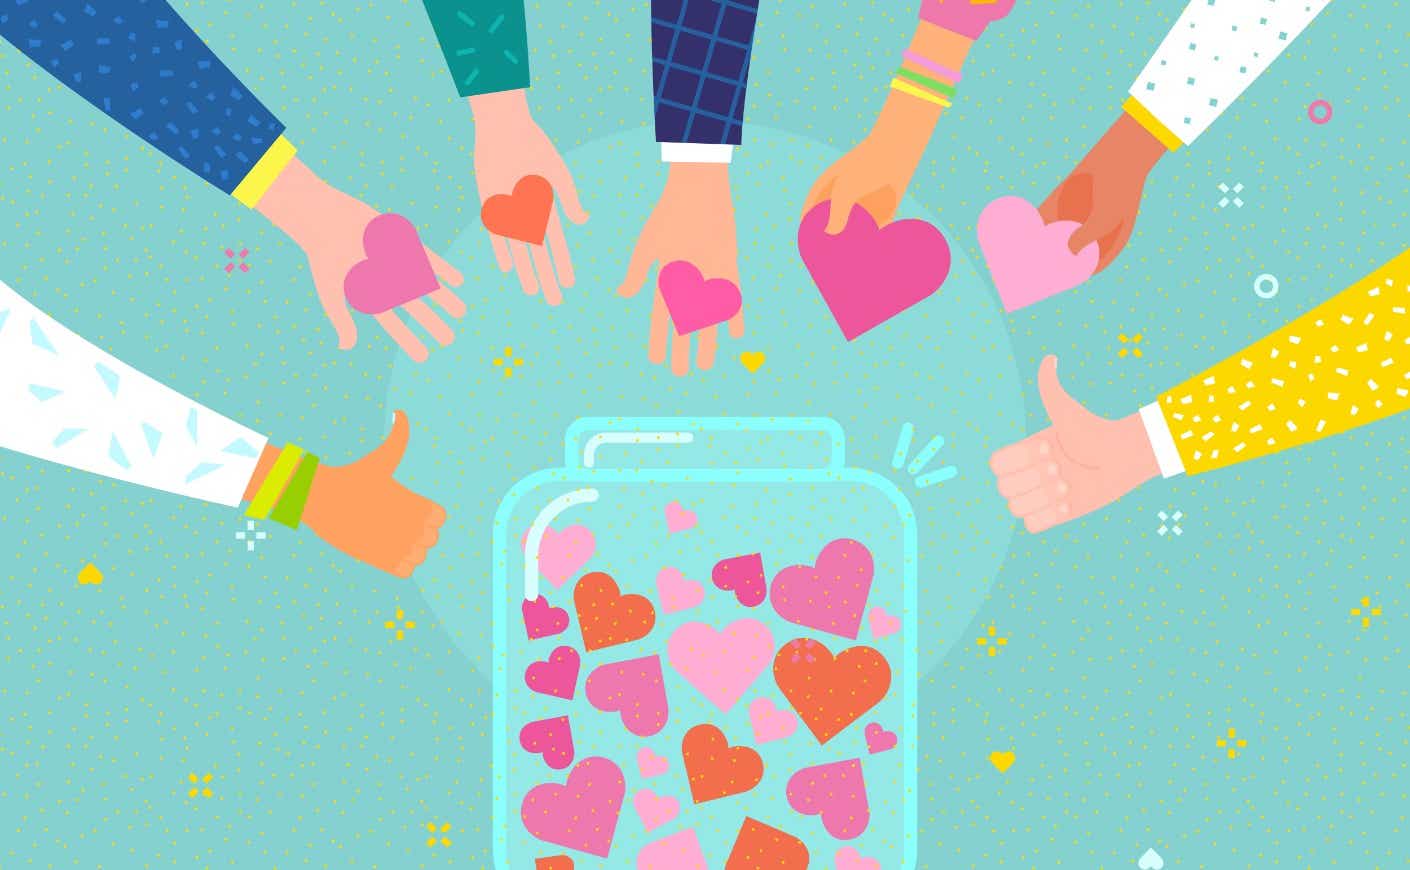 Illustration of hands putting hearts into a jar